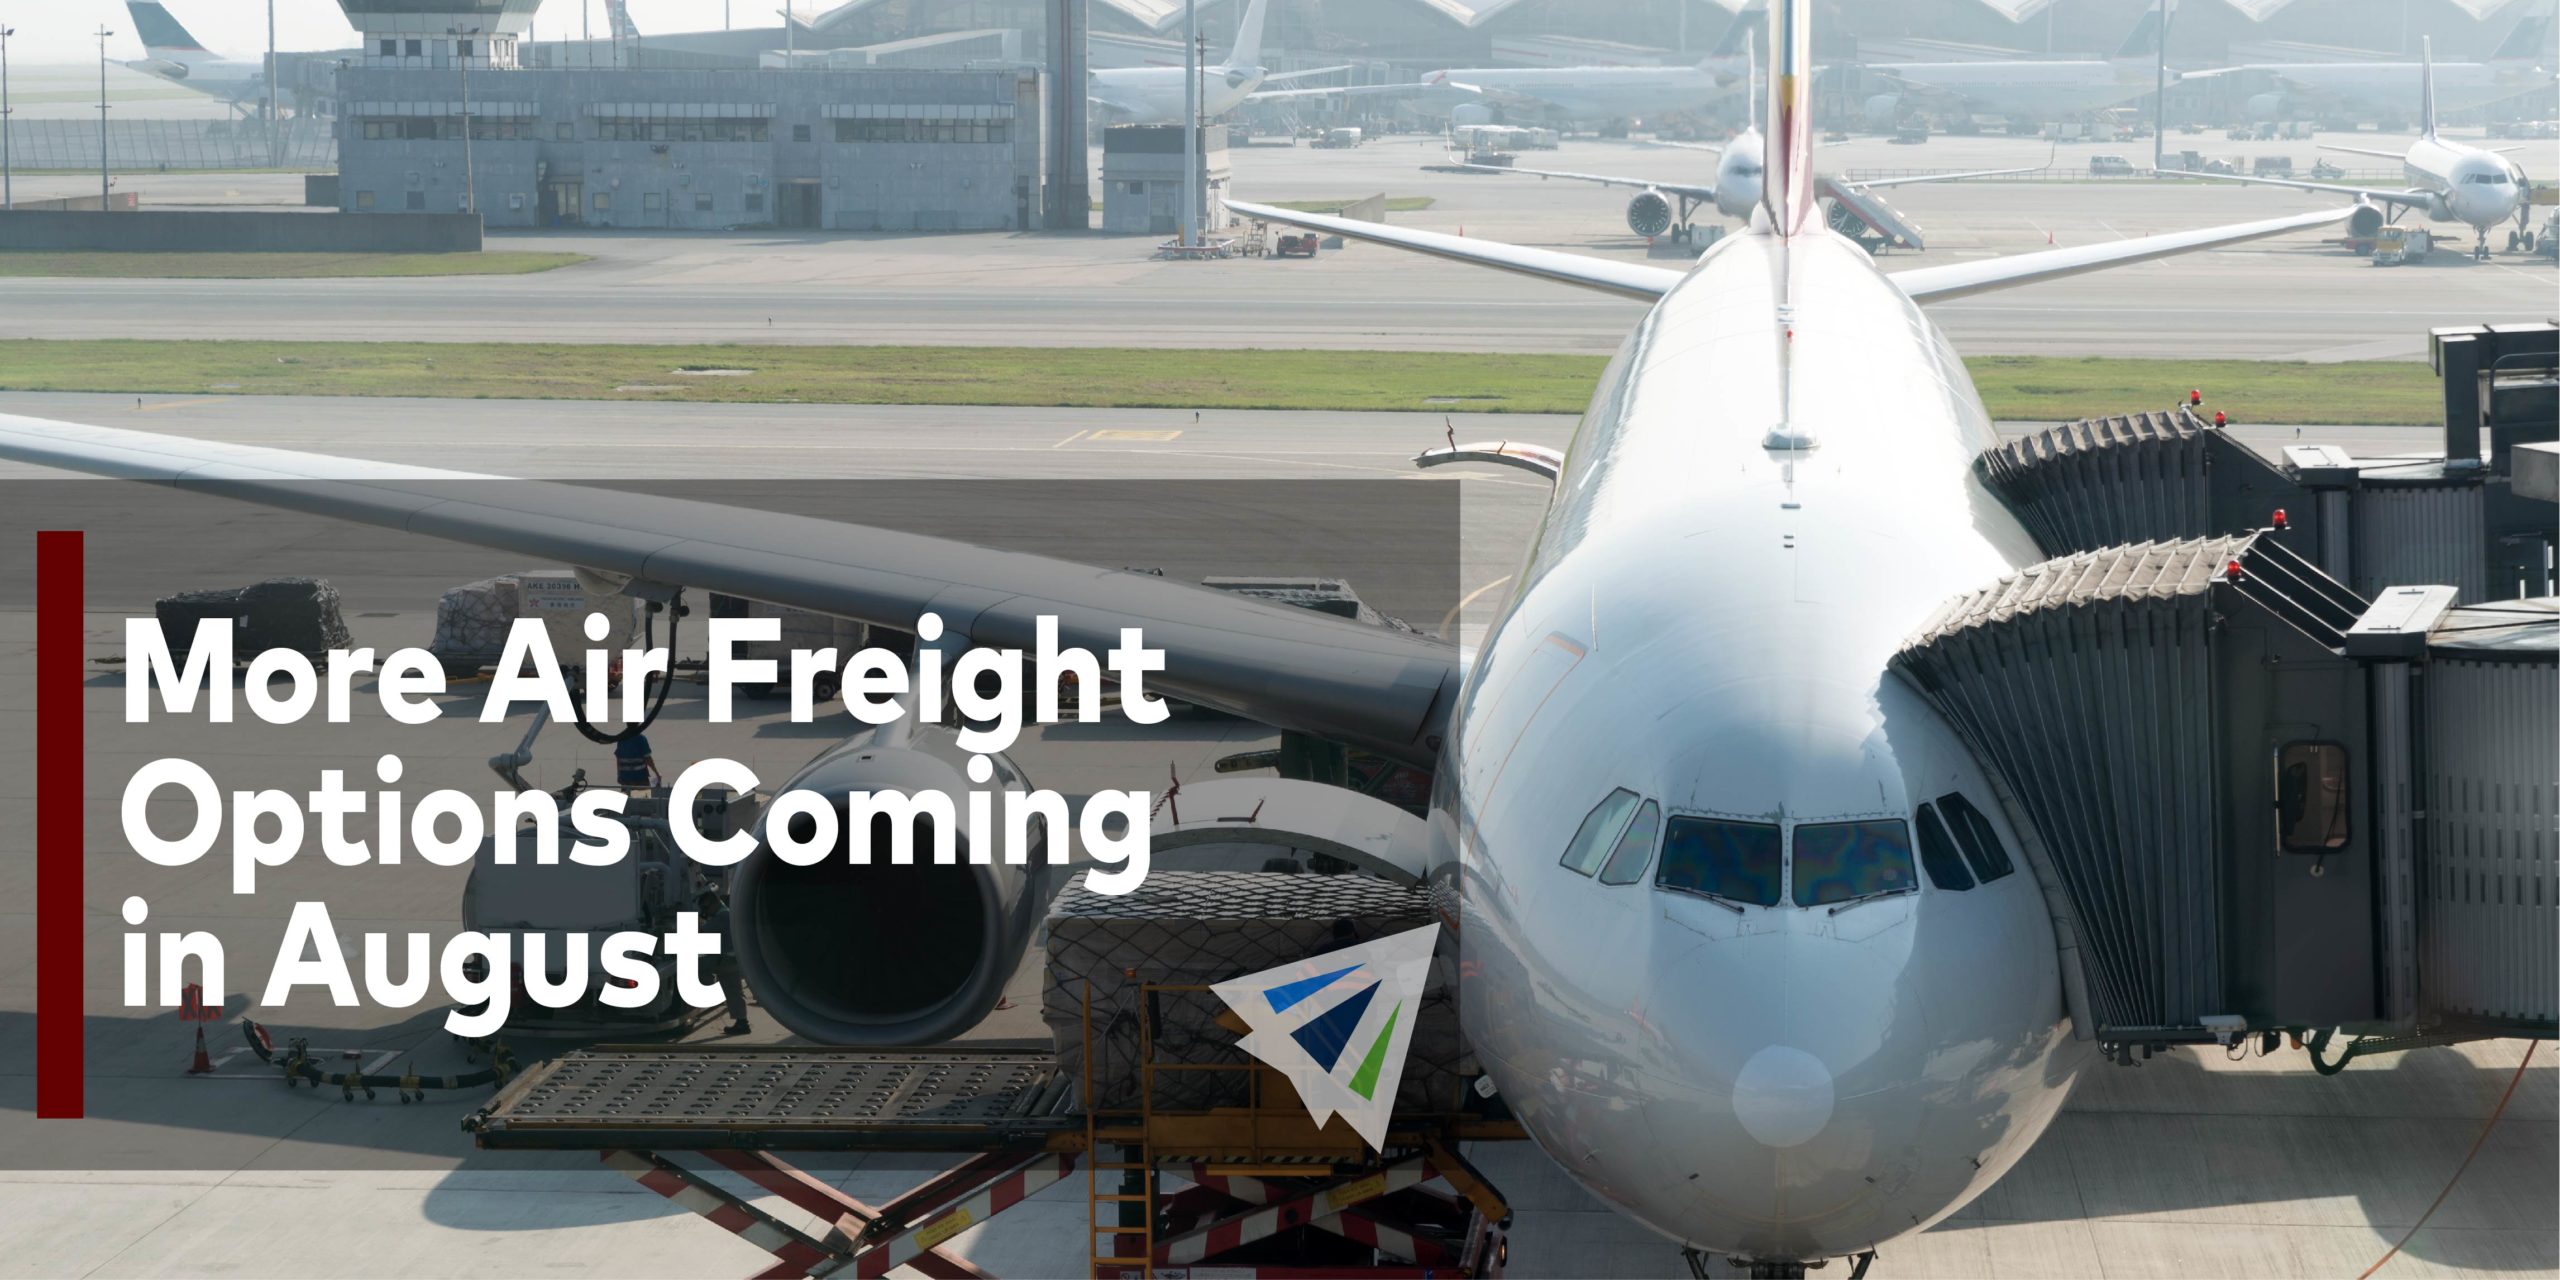 More Air Freight Options Coming in August